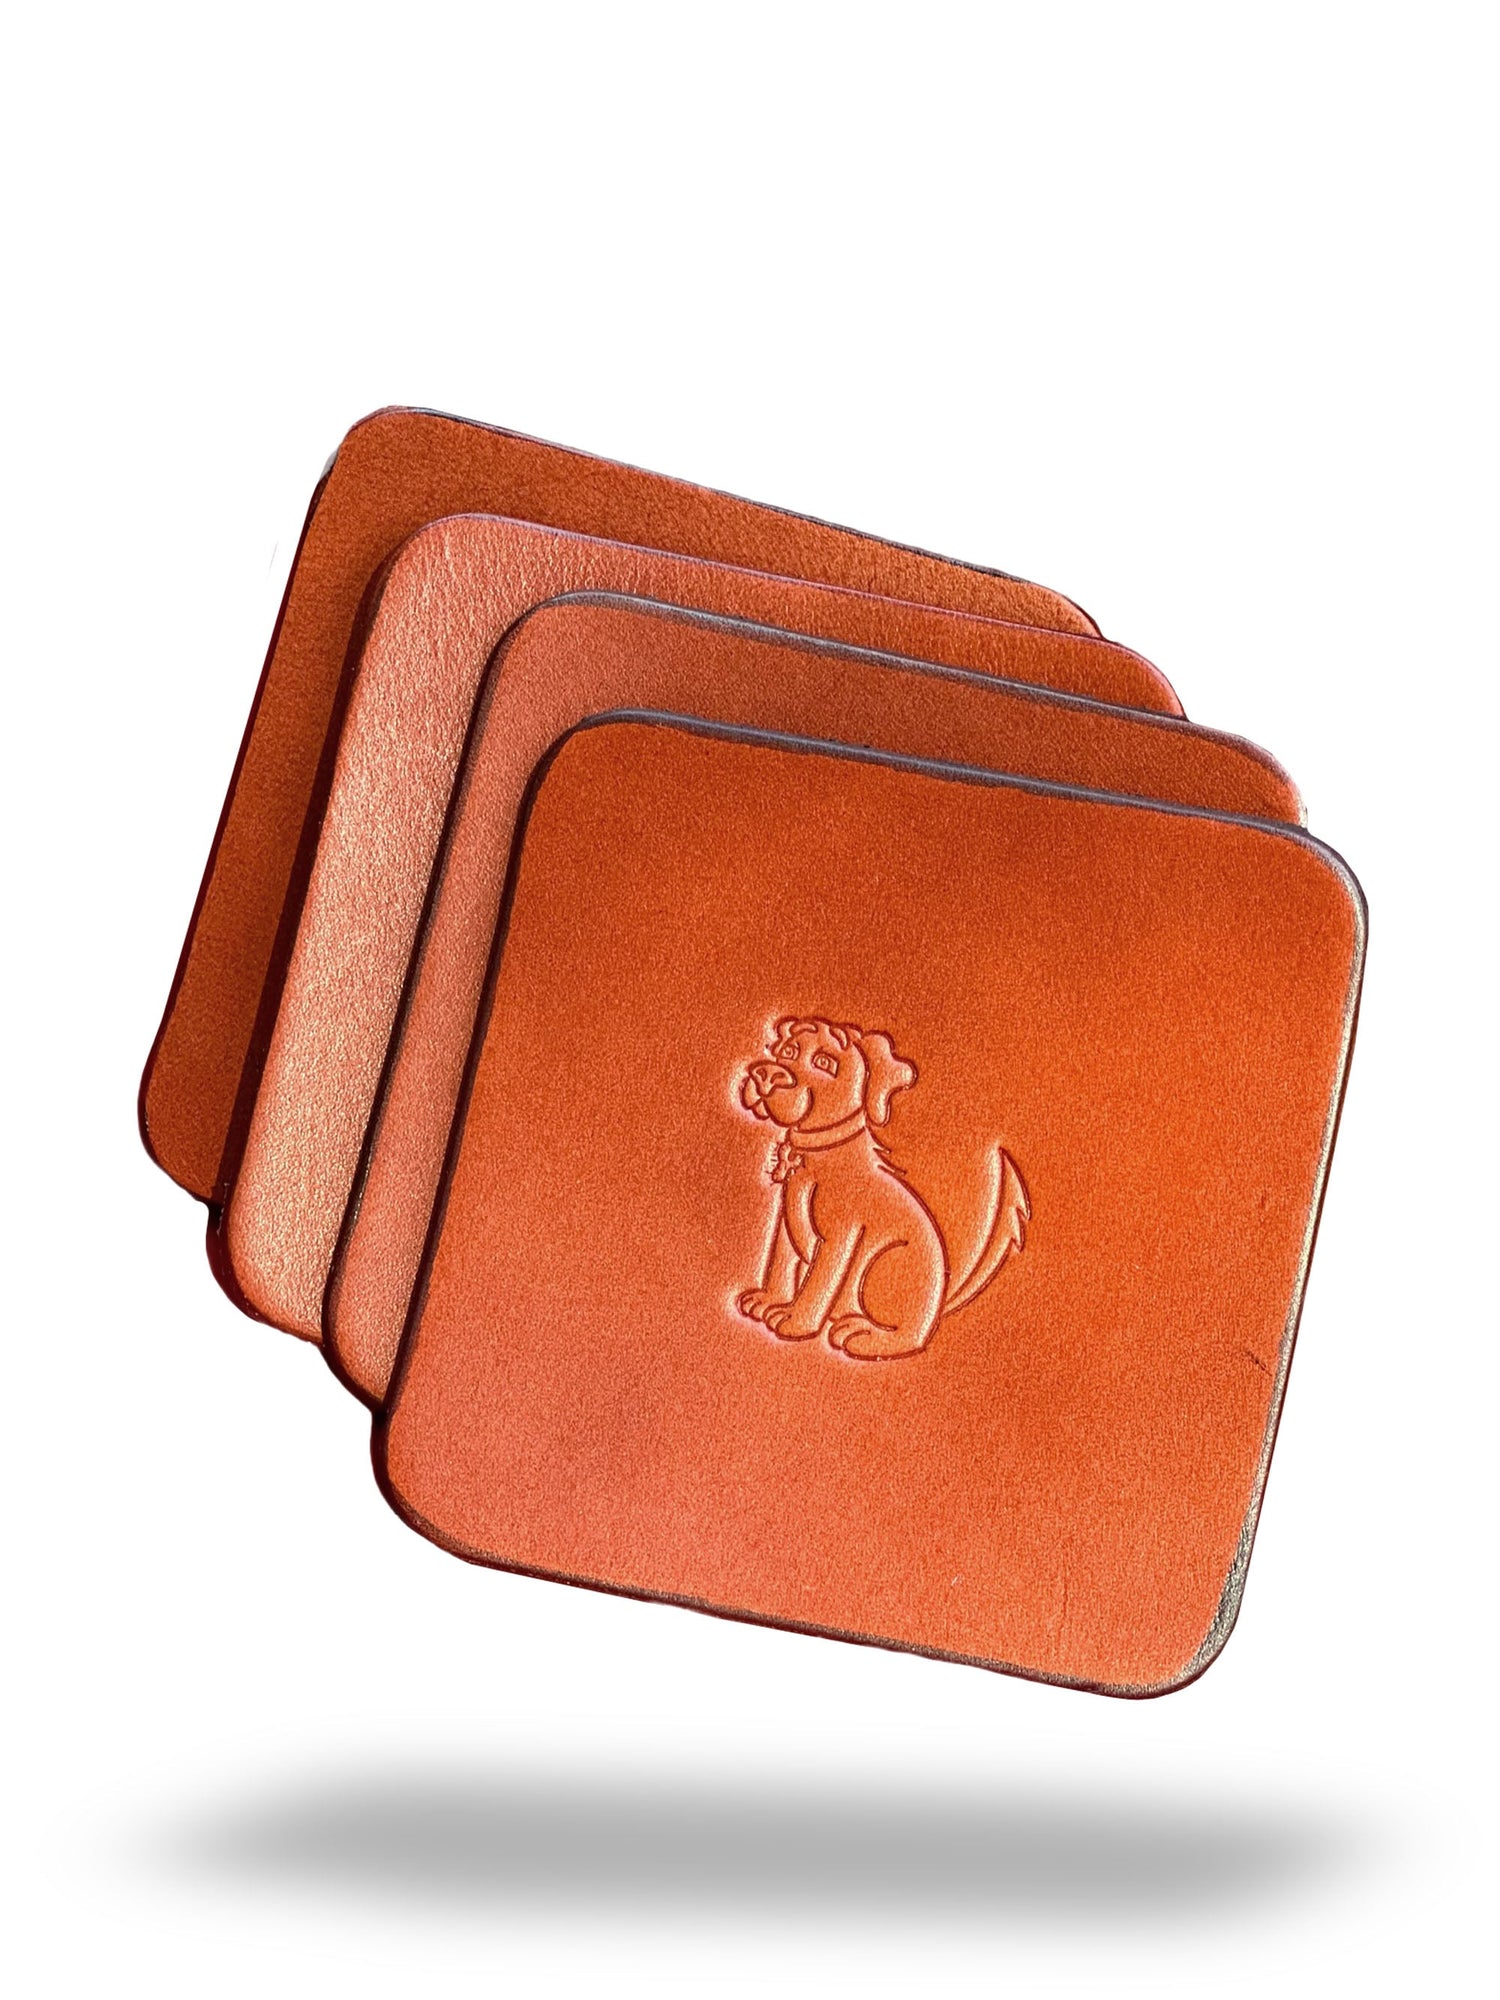 Square Leather Coasters with Dog Design - Set of 4